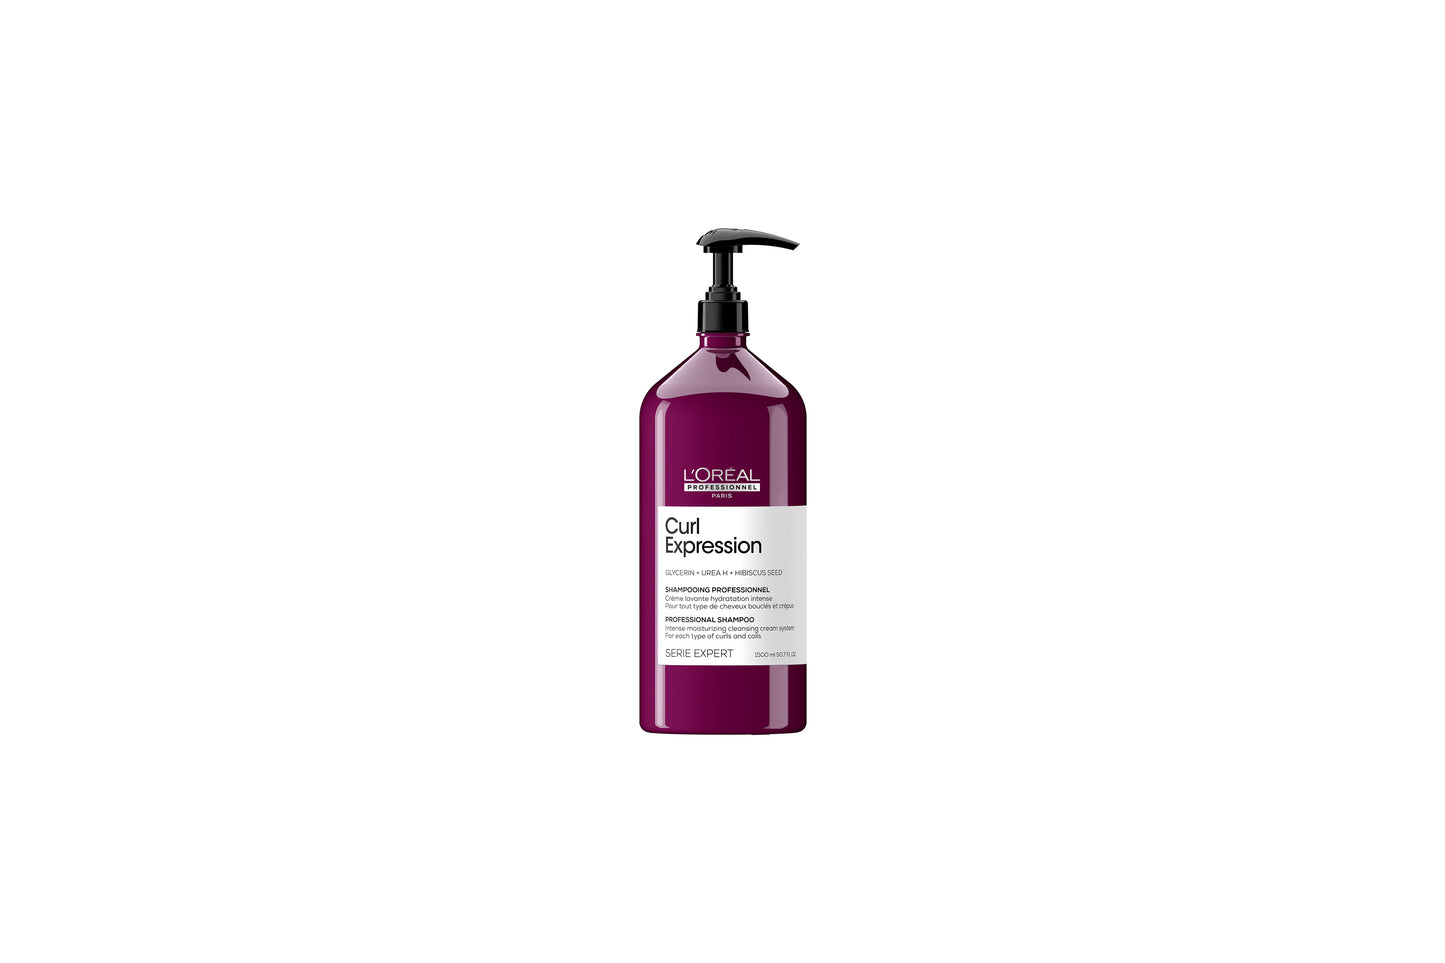 L'Oreal Curl Expression Moisturising and Hydrating Shampoo for Curls and Coils with pump 1500ml